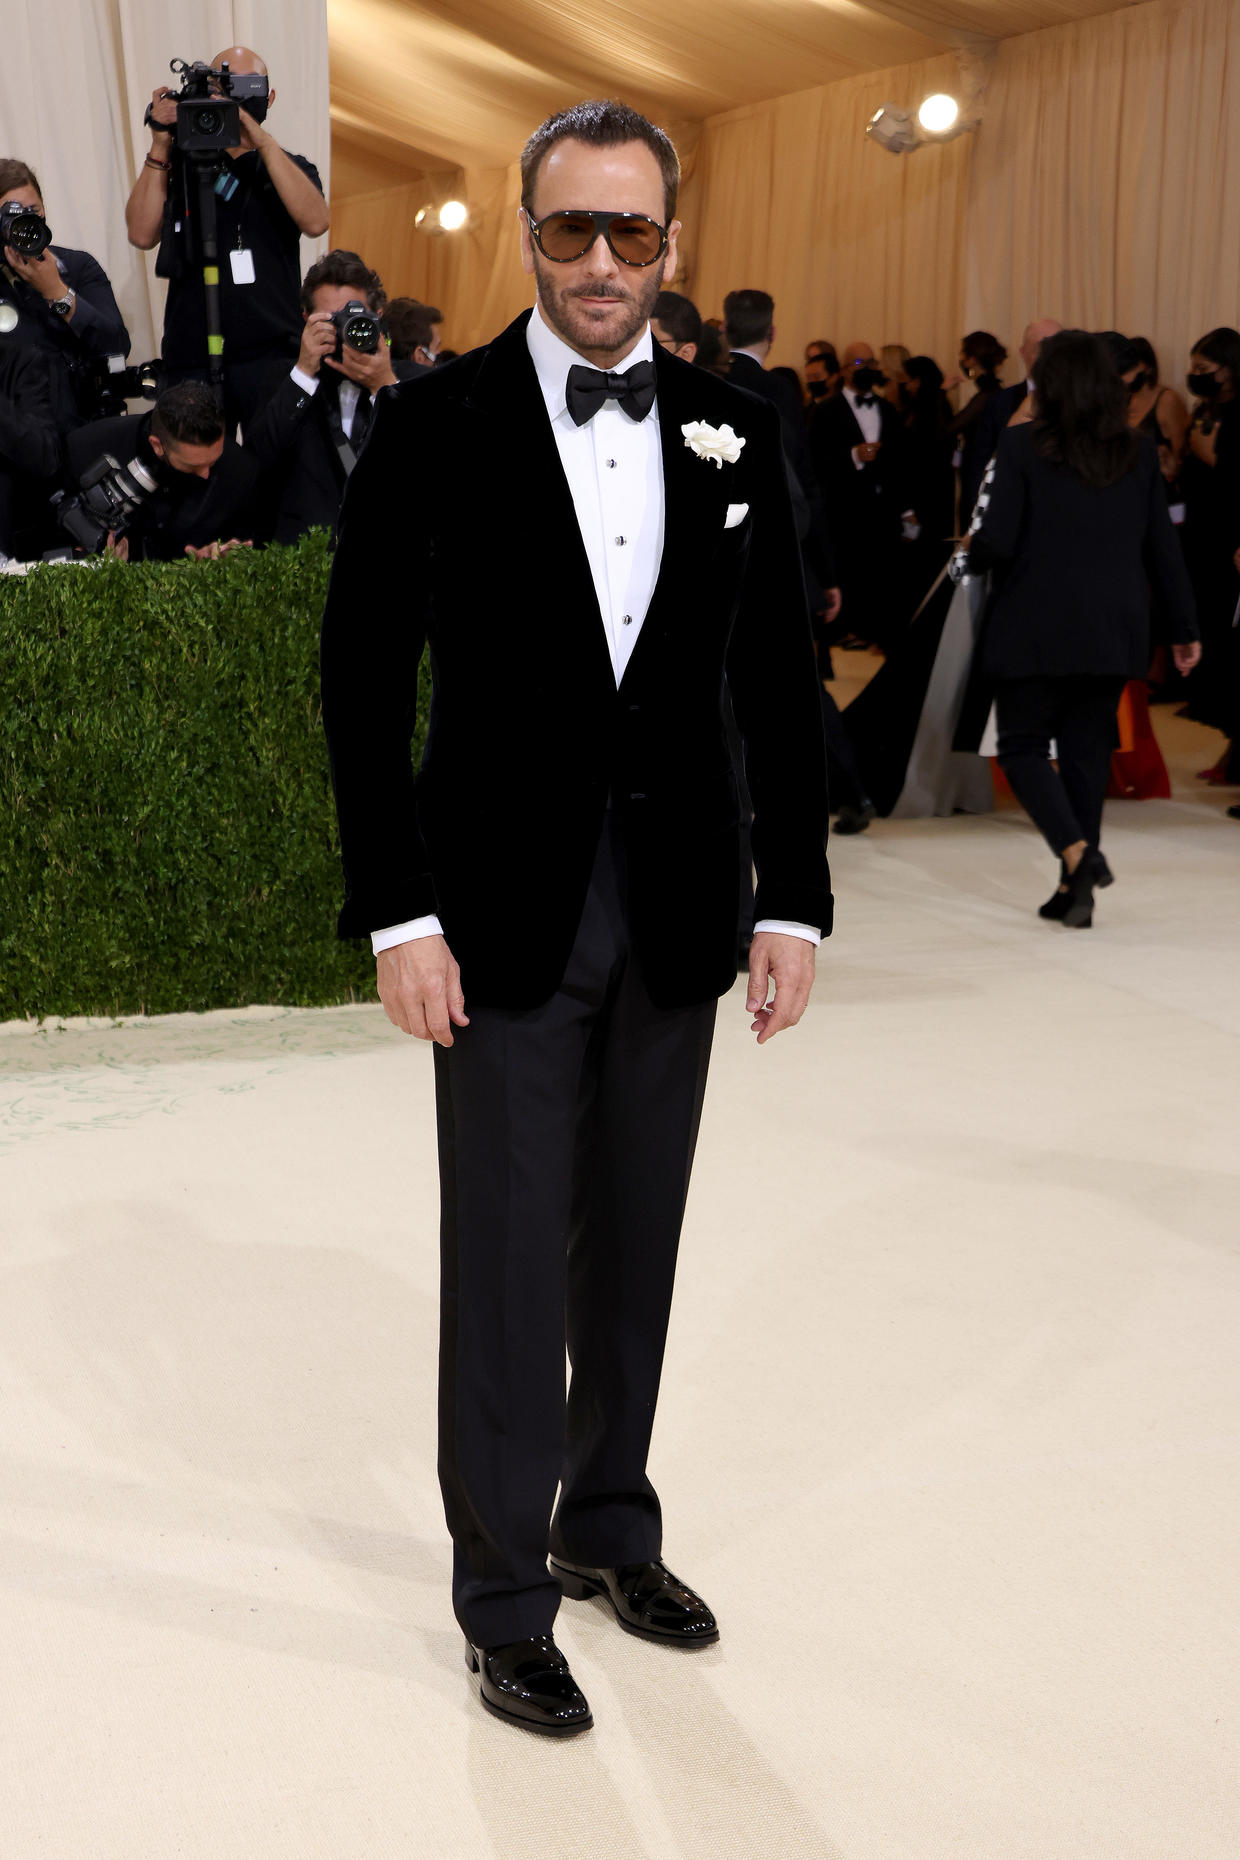 2021 Met Gala: Red carpet arrivals on fashion's biggest night